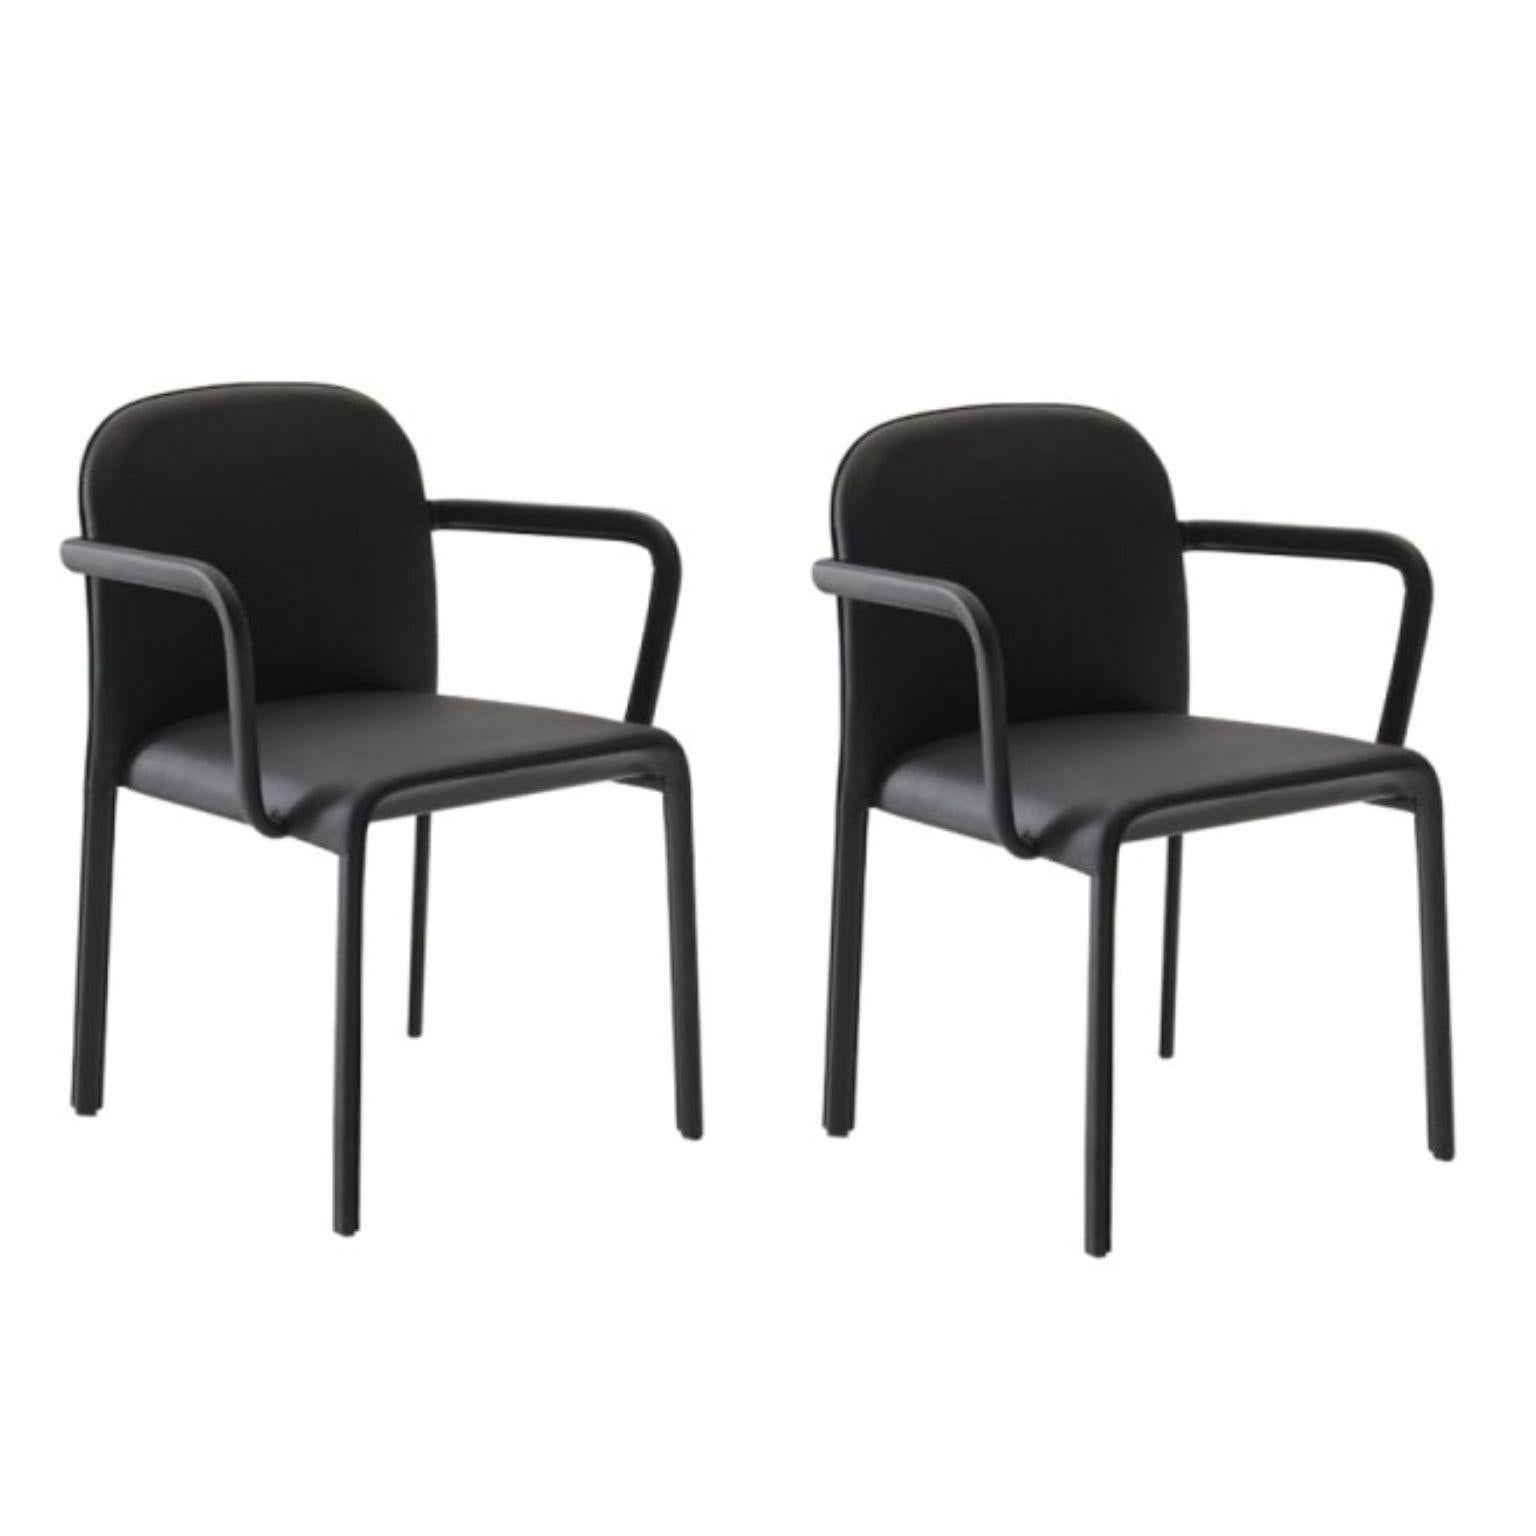 Set of 2 Scala bridge chairs by Patrick Jouin
Materials: chair covered in corrected pigmented cowhide leather. Backrest in split leather. Colors: black, brown, white, red
Dimensions: D 45 x W 55 x H 80 cm
Also available in colors: black, brown,